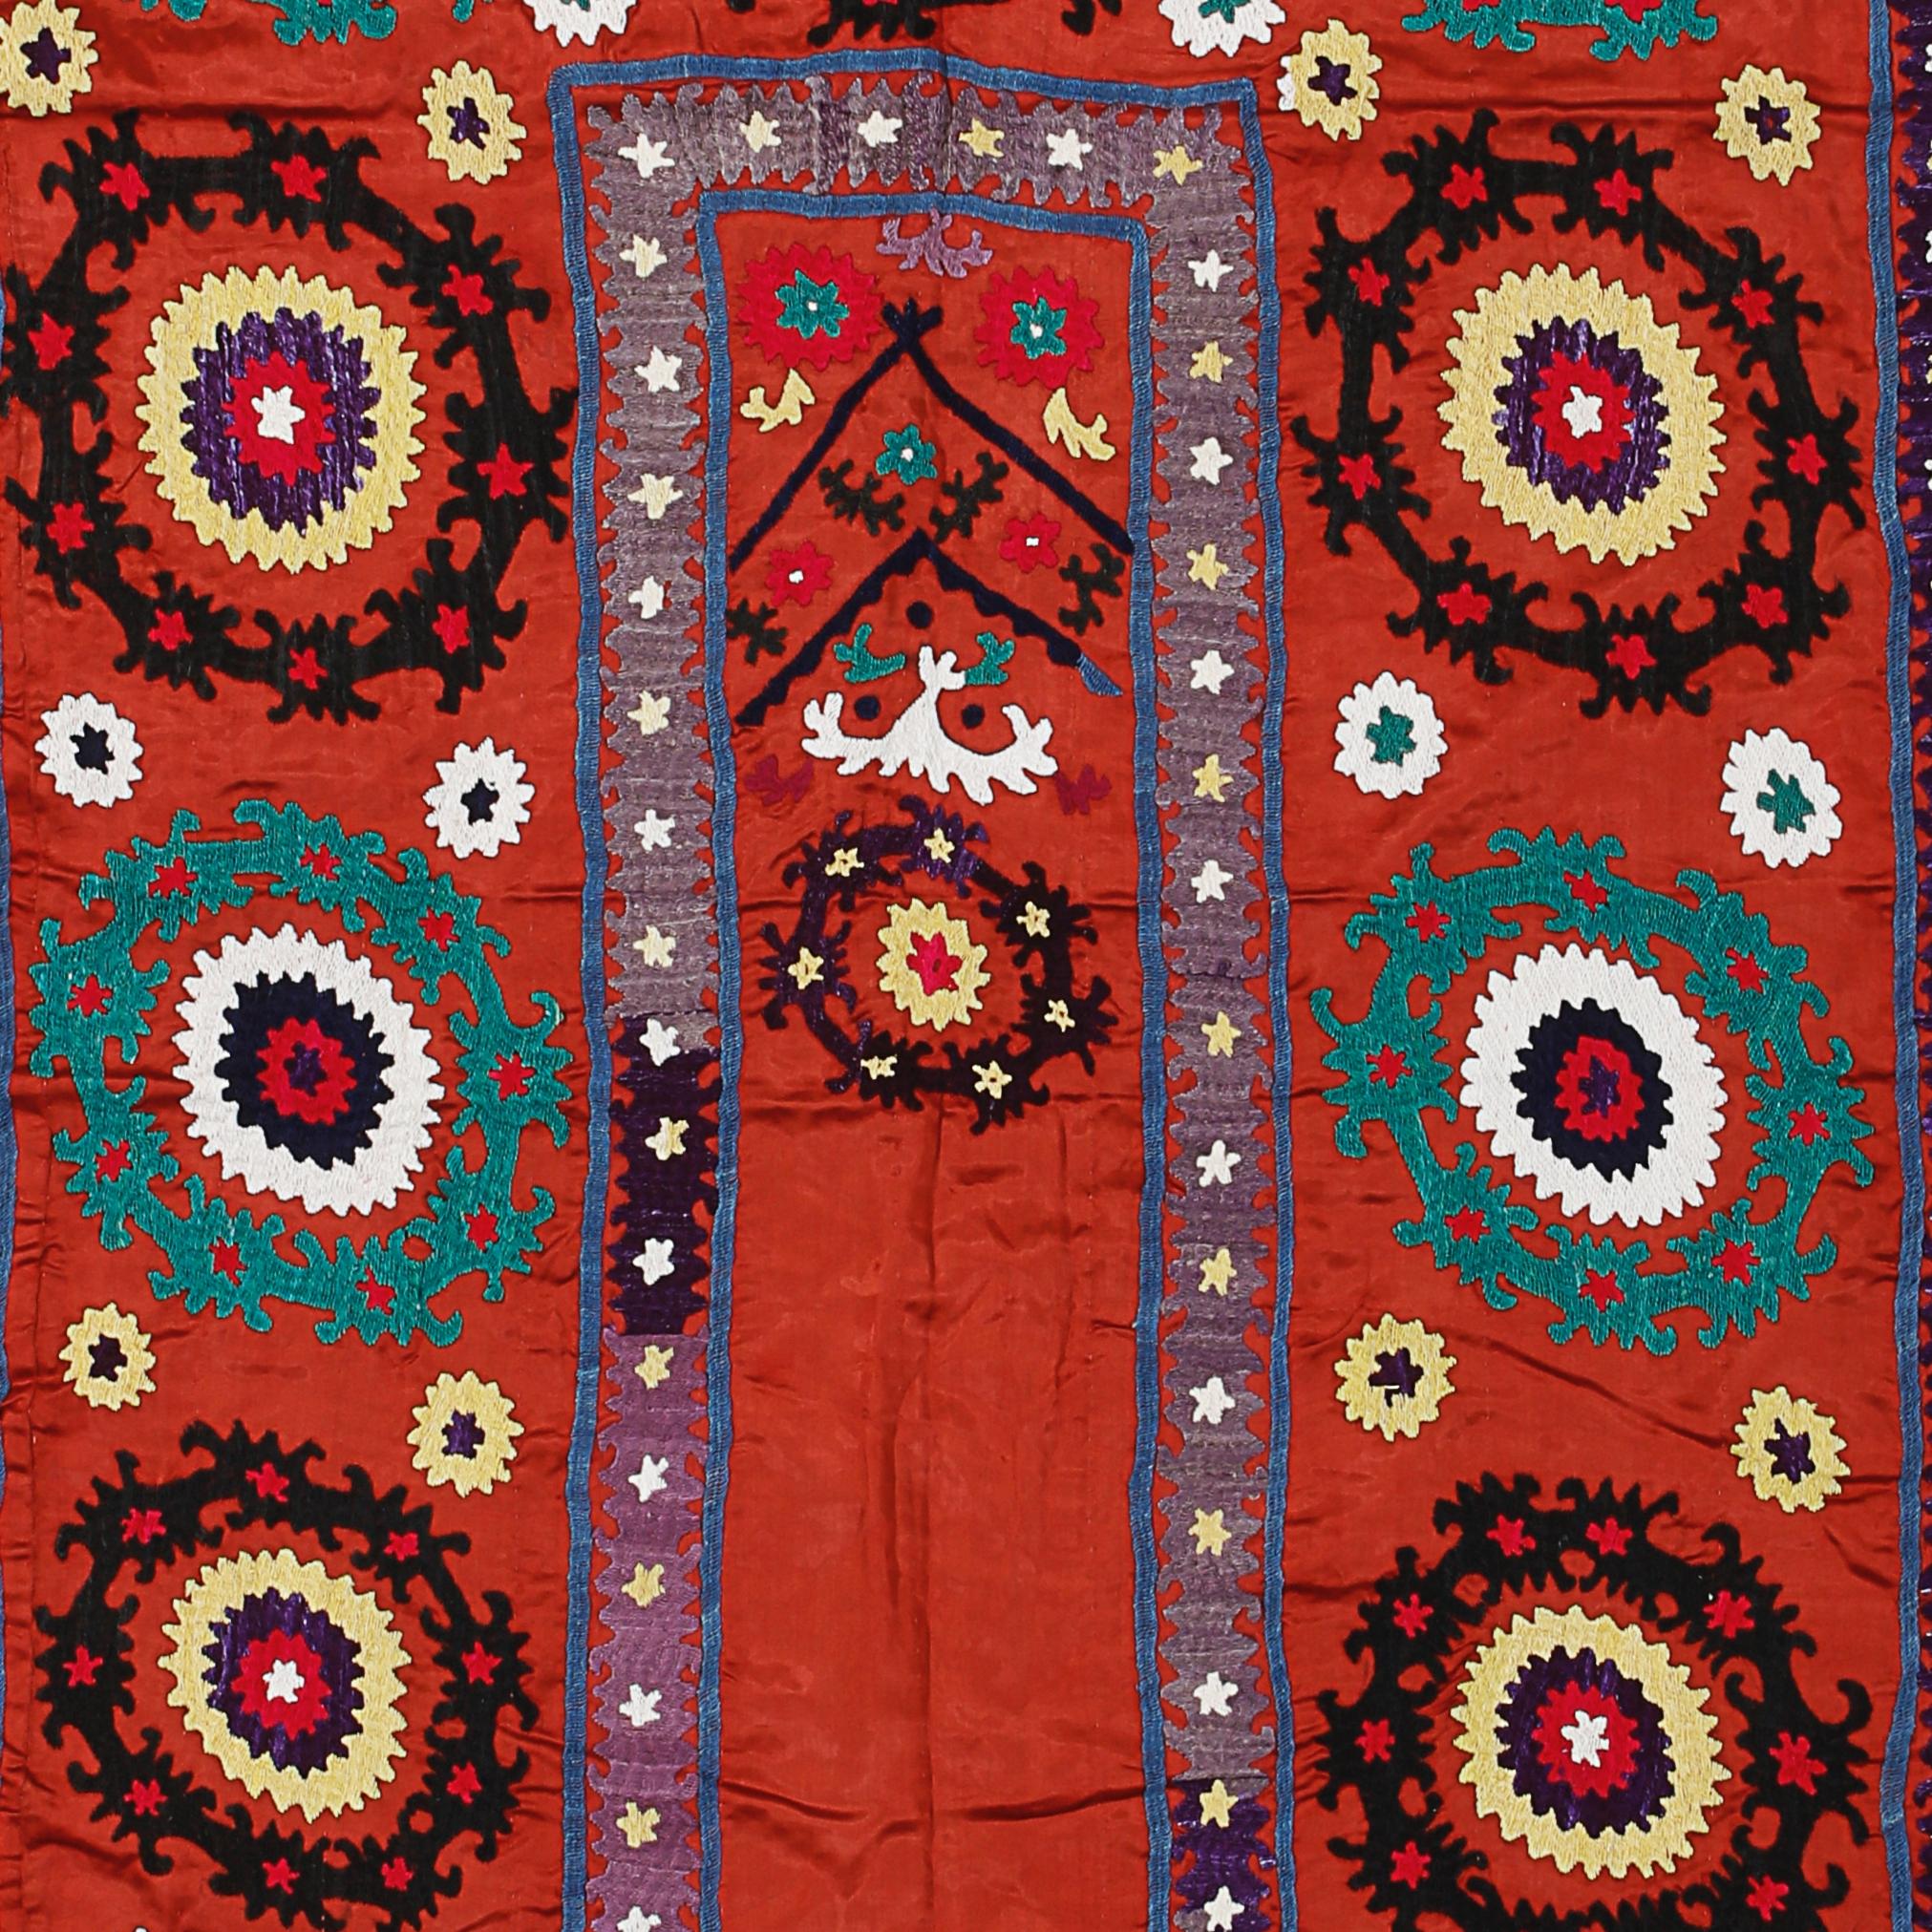 Ouzbek 3.2x5.3 Ft Tashkent Suzani Textile Wall Hanging, Red Silk Embroidery Table Cover en vente